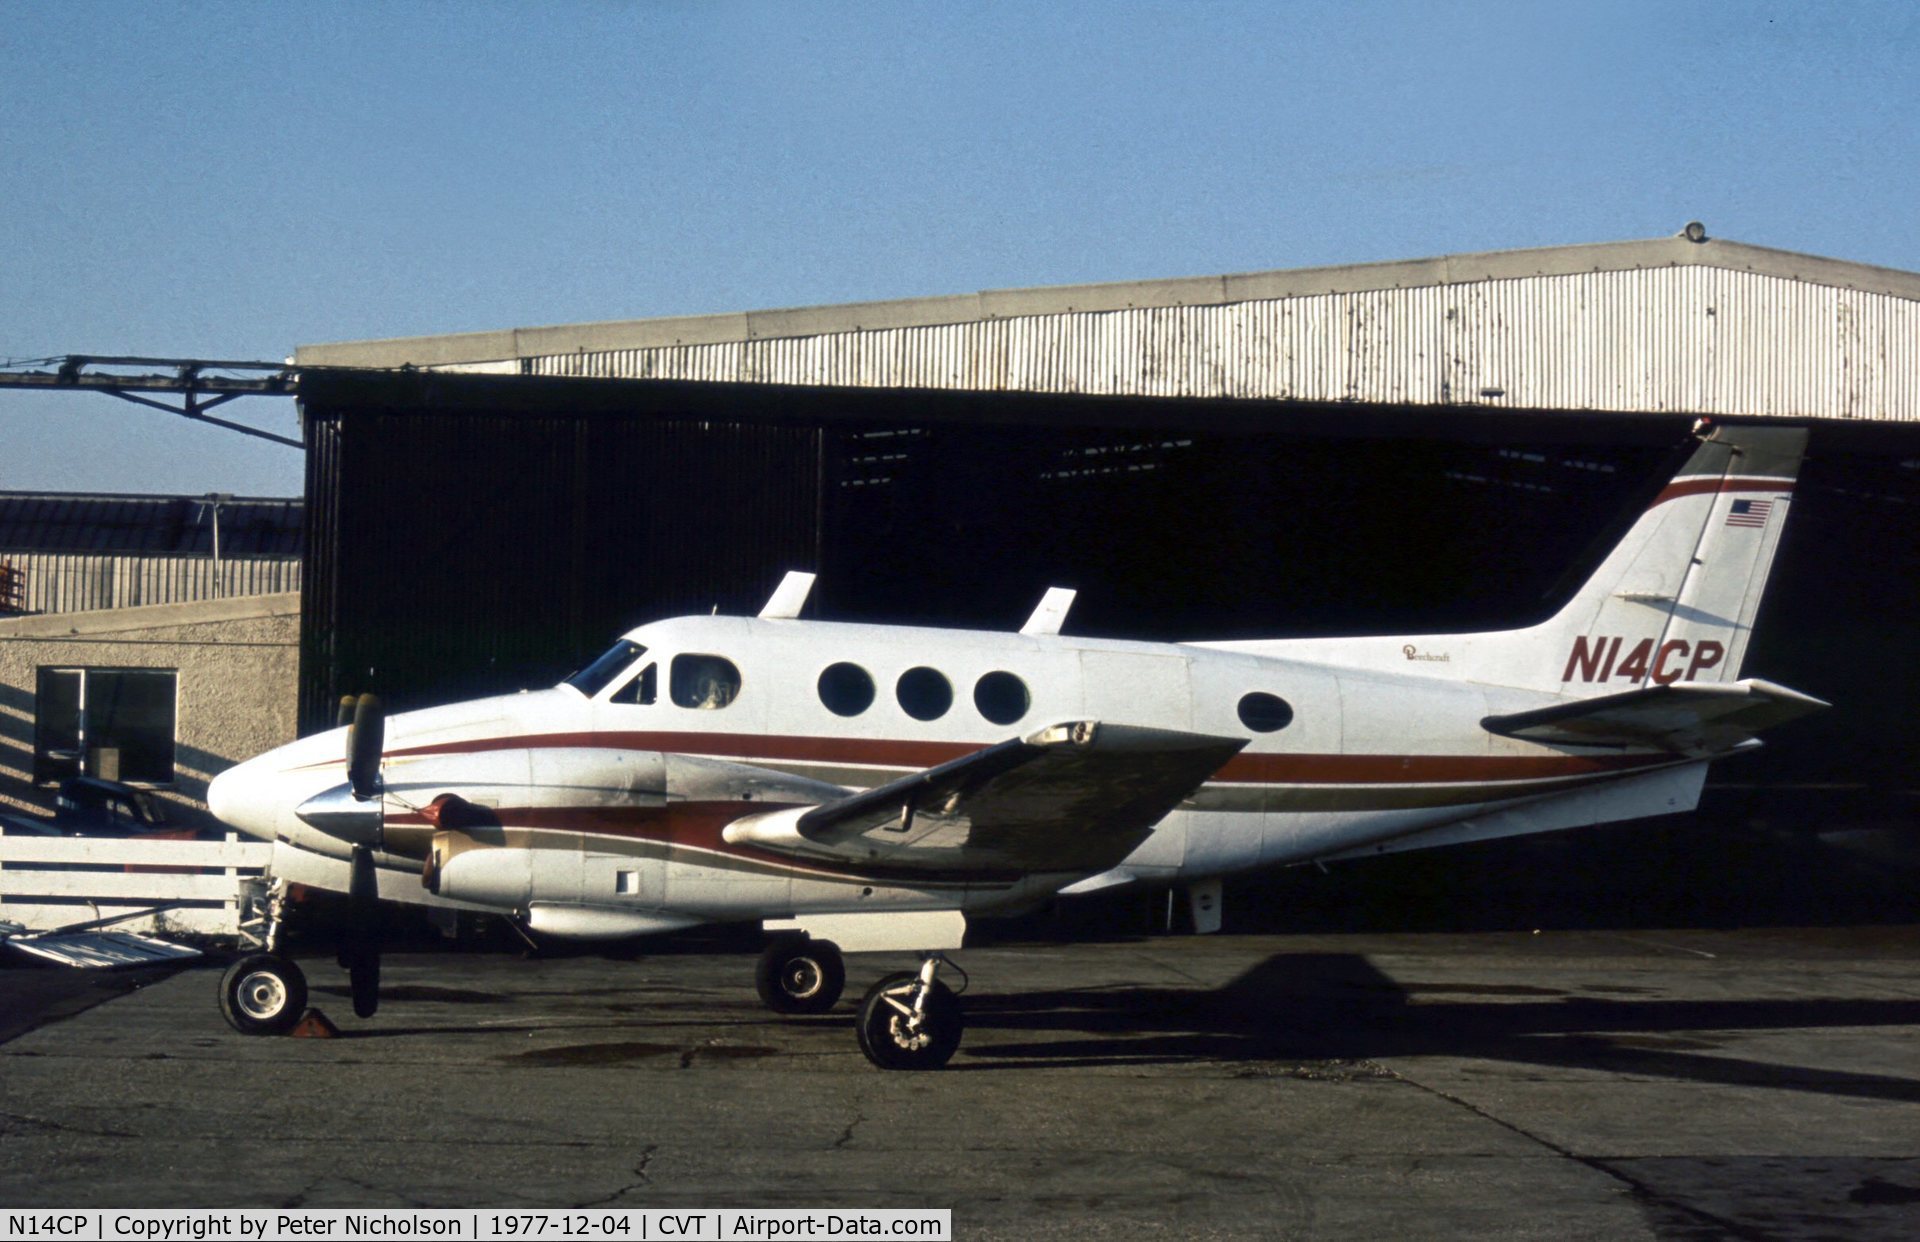 N14CP, 1973 Beech C90 King Air C/N LJ-585, This King Air was operated by Scholl Inc in the mid-seventies based at Luton and was seen at Coventry in December 1977.